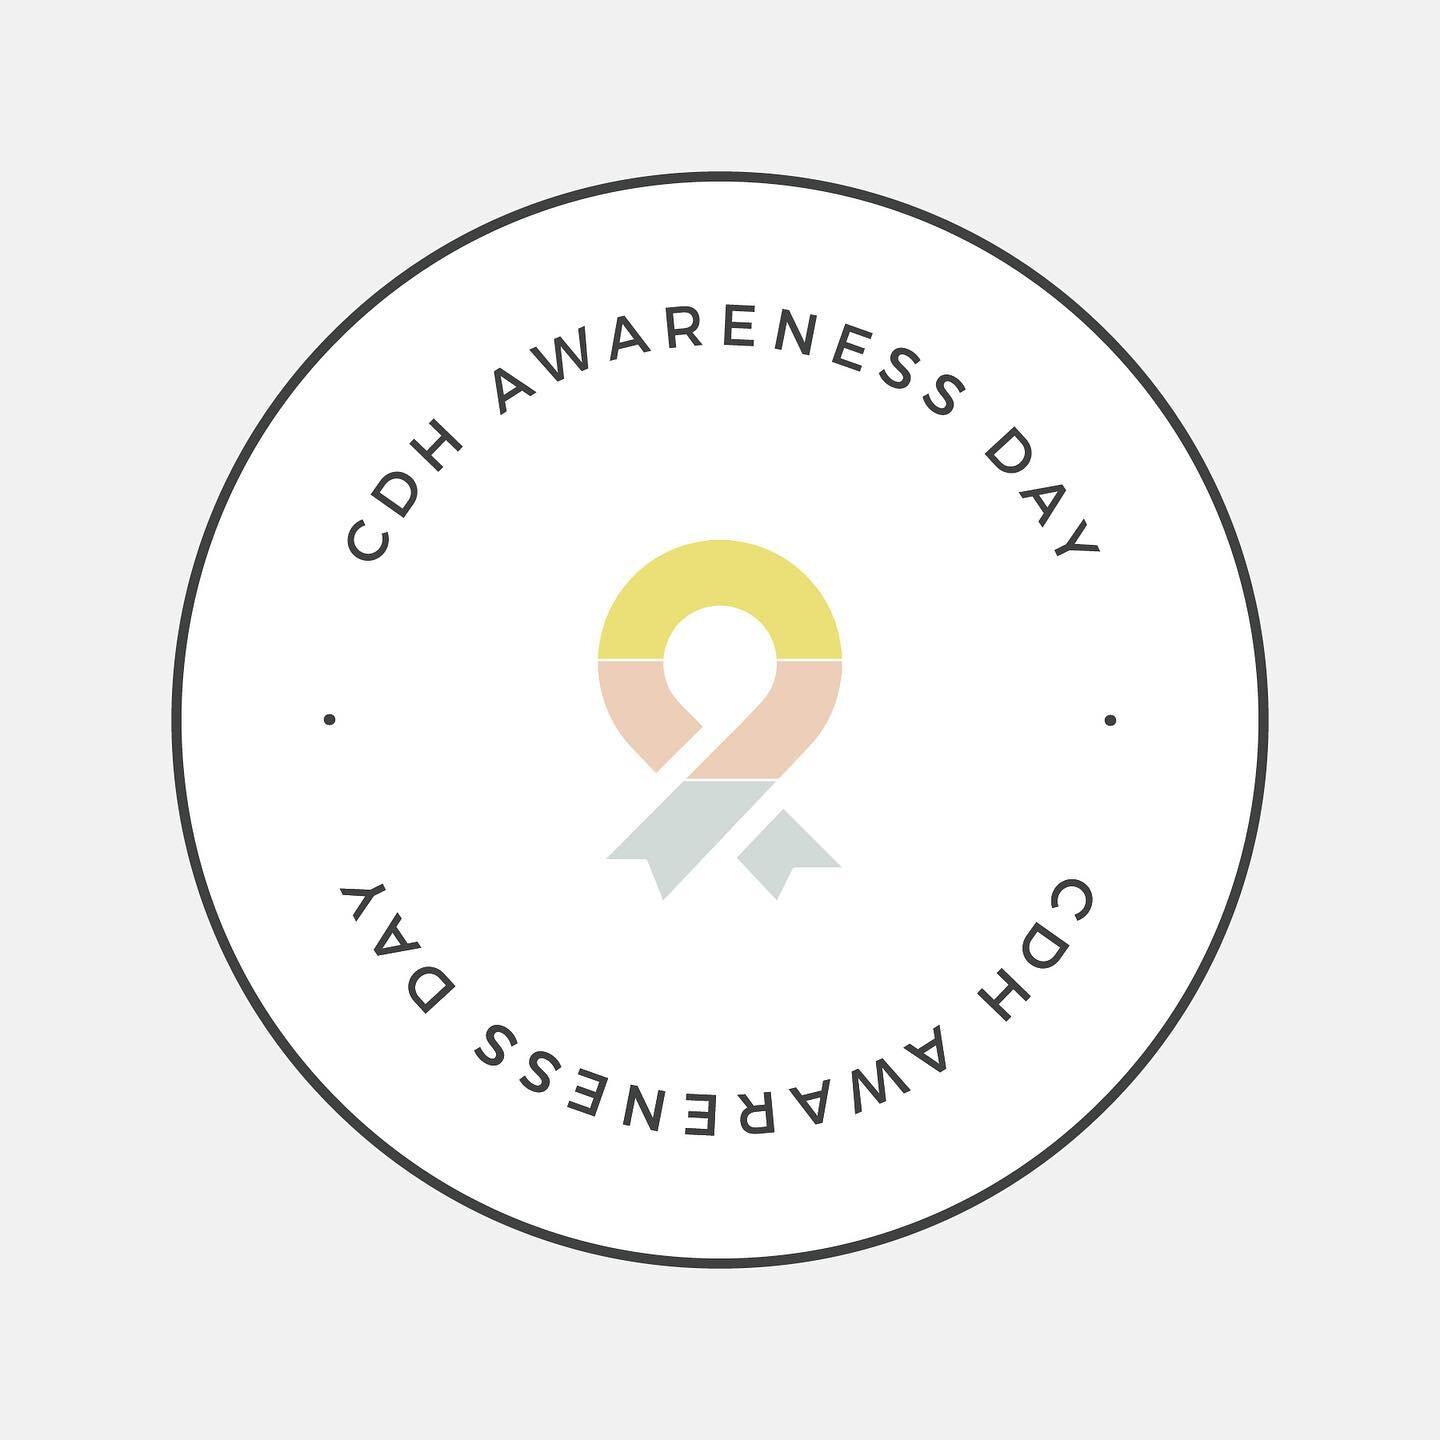 PLEASE READ ❤️

TODAY, April 19th is Congenital Diaphragmatic Hernia (CDH) Awareness Day. In honour of my tiny hero Finn, 100% of the proceeds from sales made today in my Thrive by Melissa Dawn shop will be going toward @mytinyhero and @cheohospital 